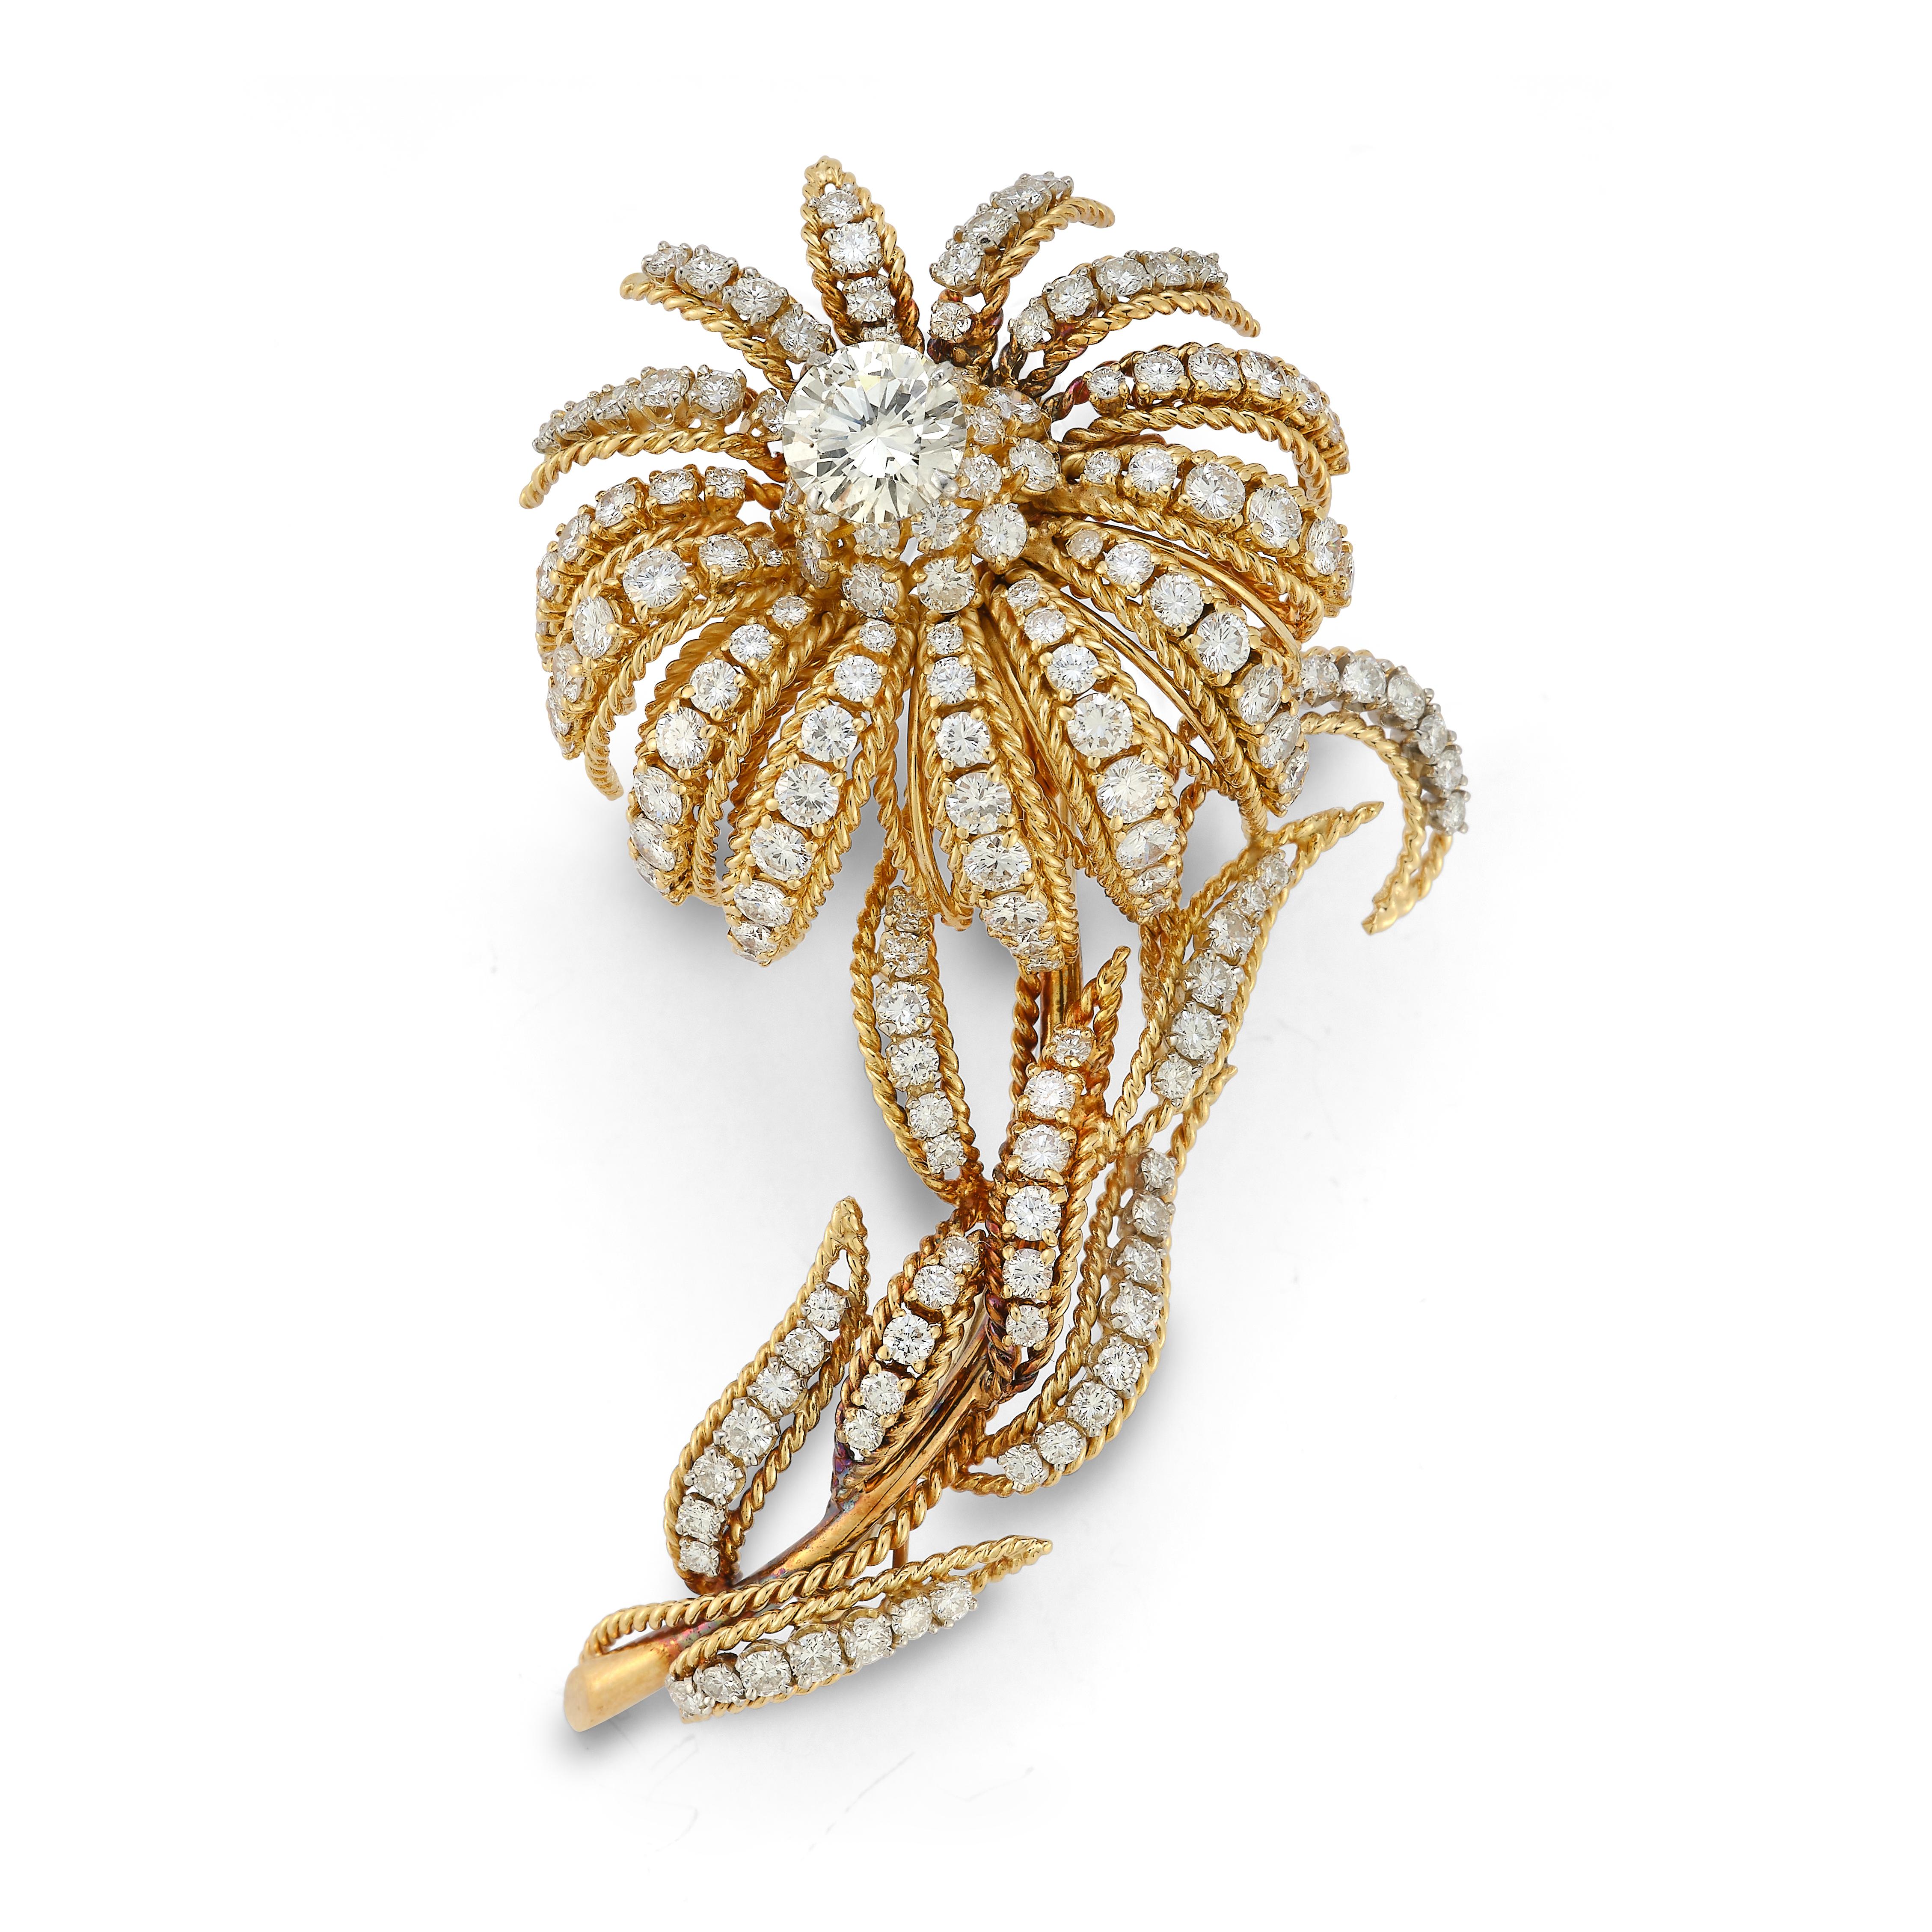 Round Cut Diamond & Gold Flower Brooch

1 center round cut diamond approximately 1.10 ct surrounded by 163 smaller round cut diamonds.

Diamonds total approximate weight: 12.84ct

Measurements: 2.75